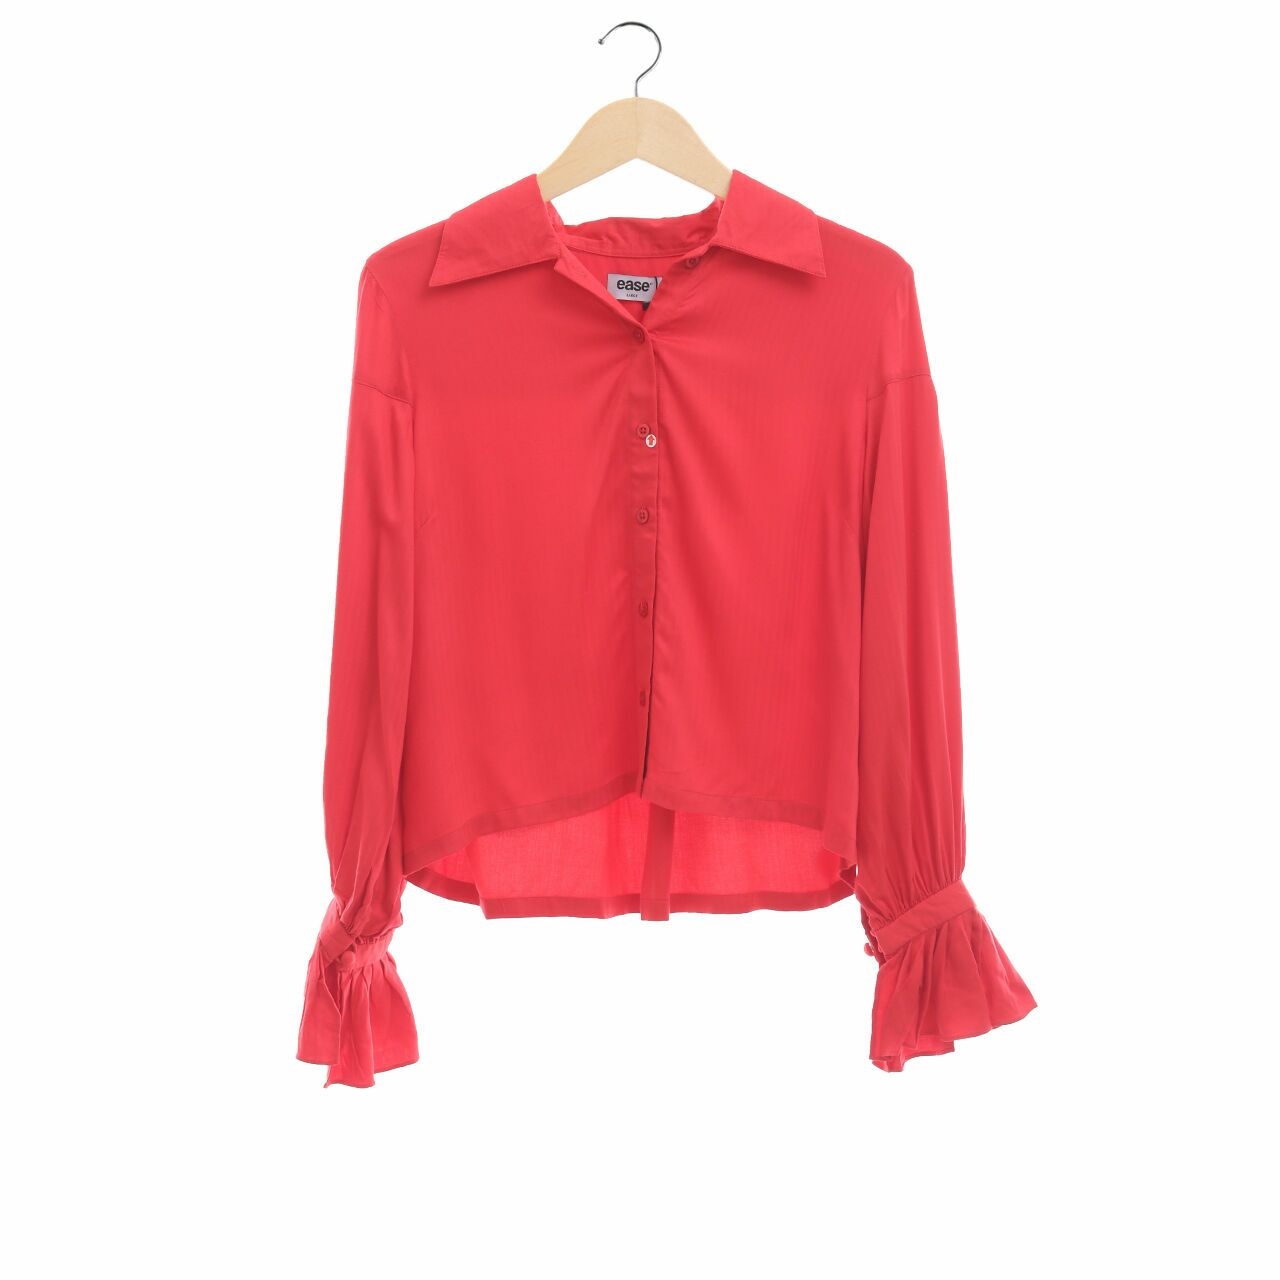 Ease Red Shirt